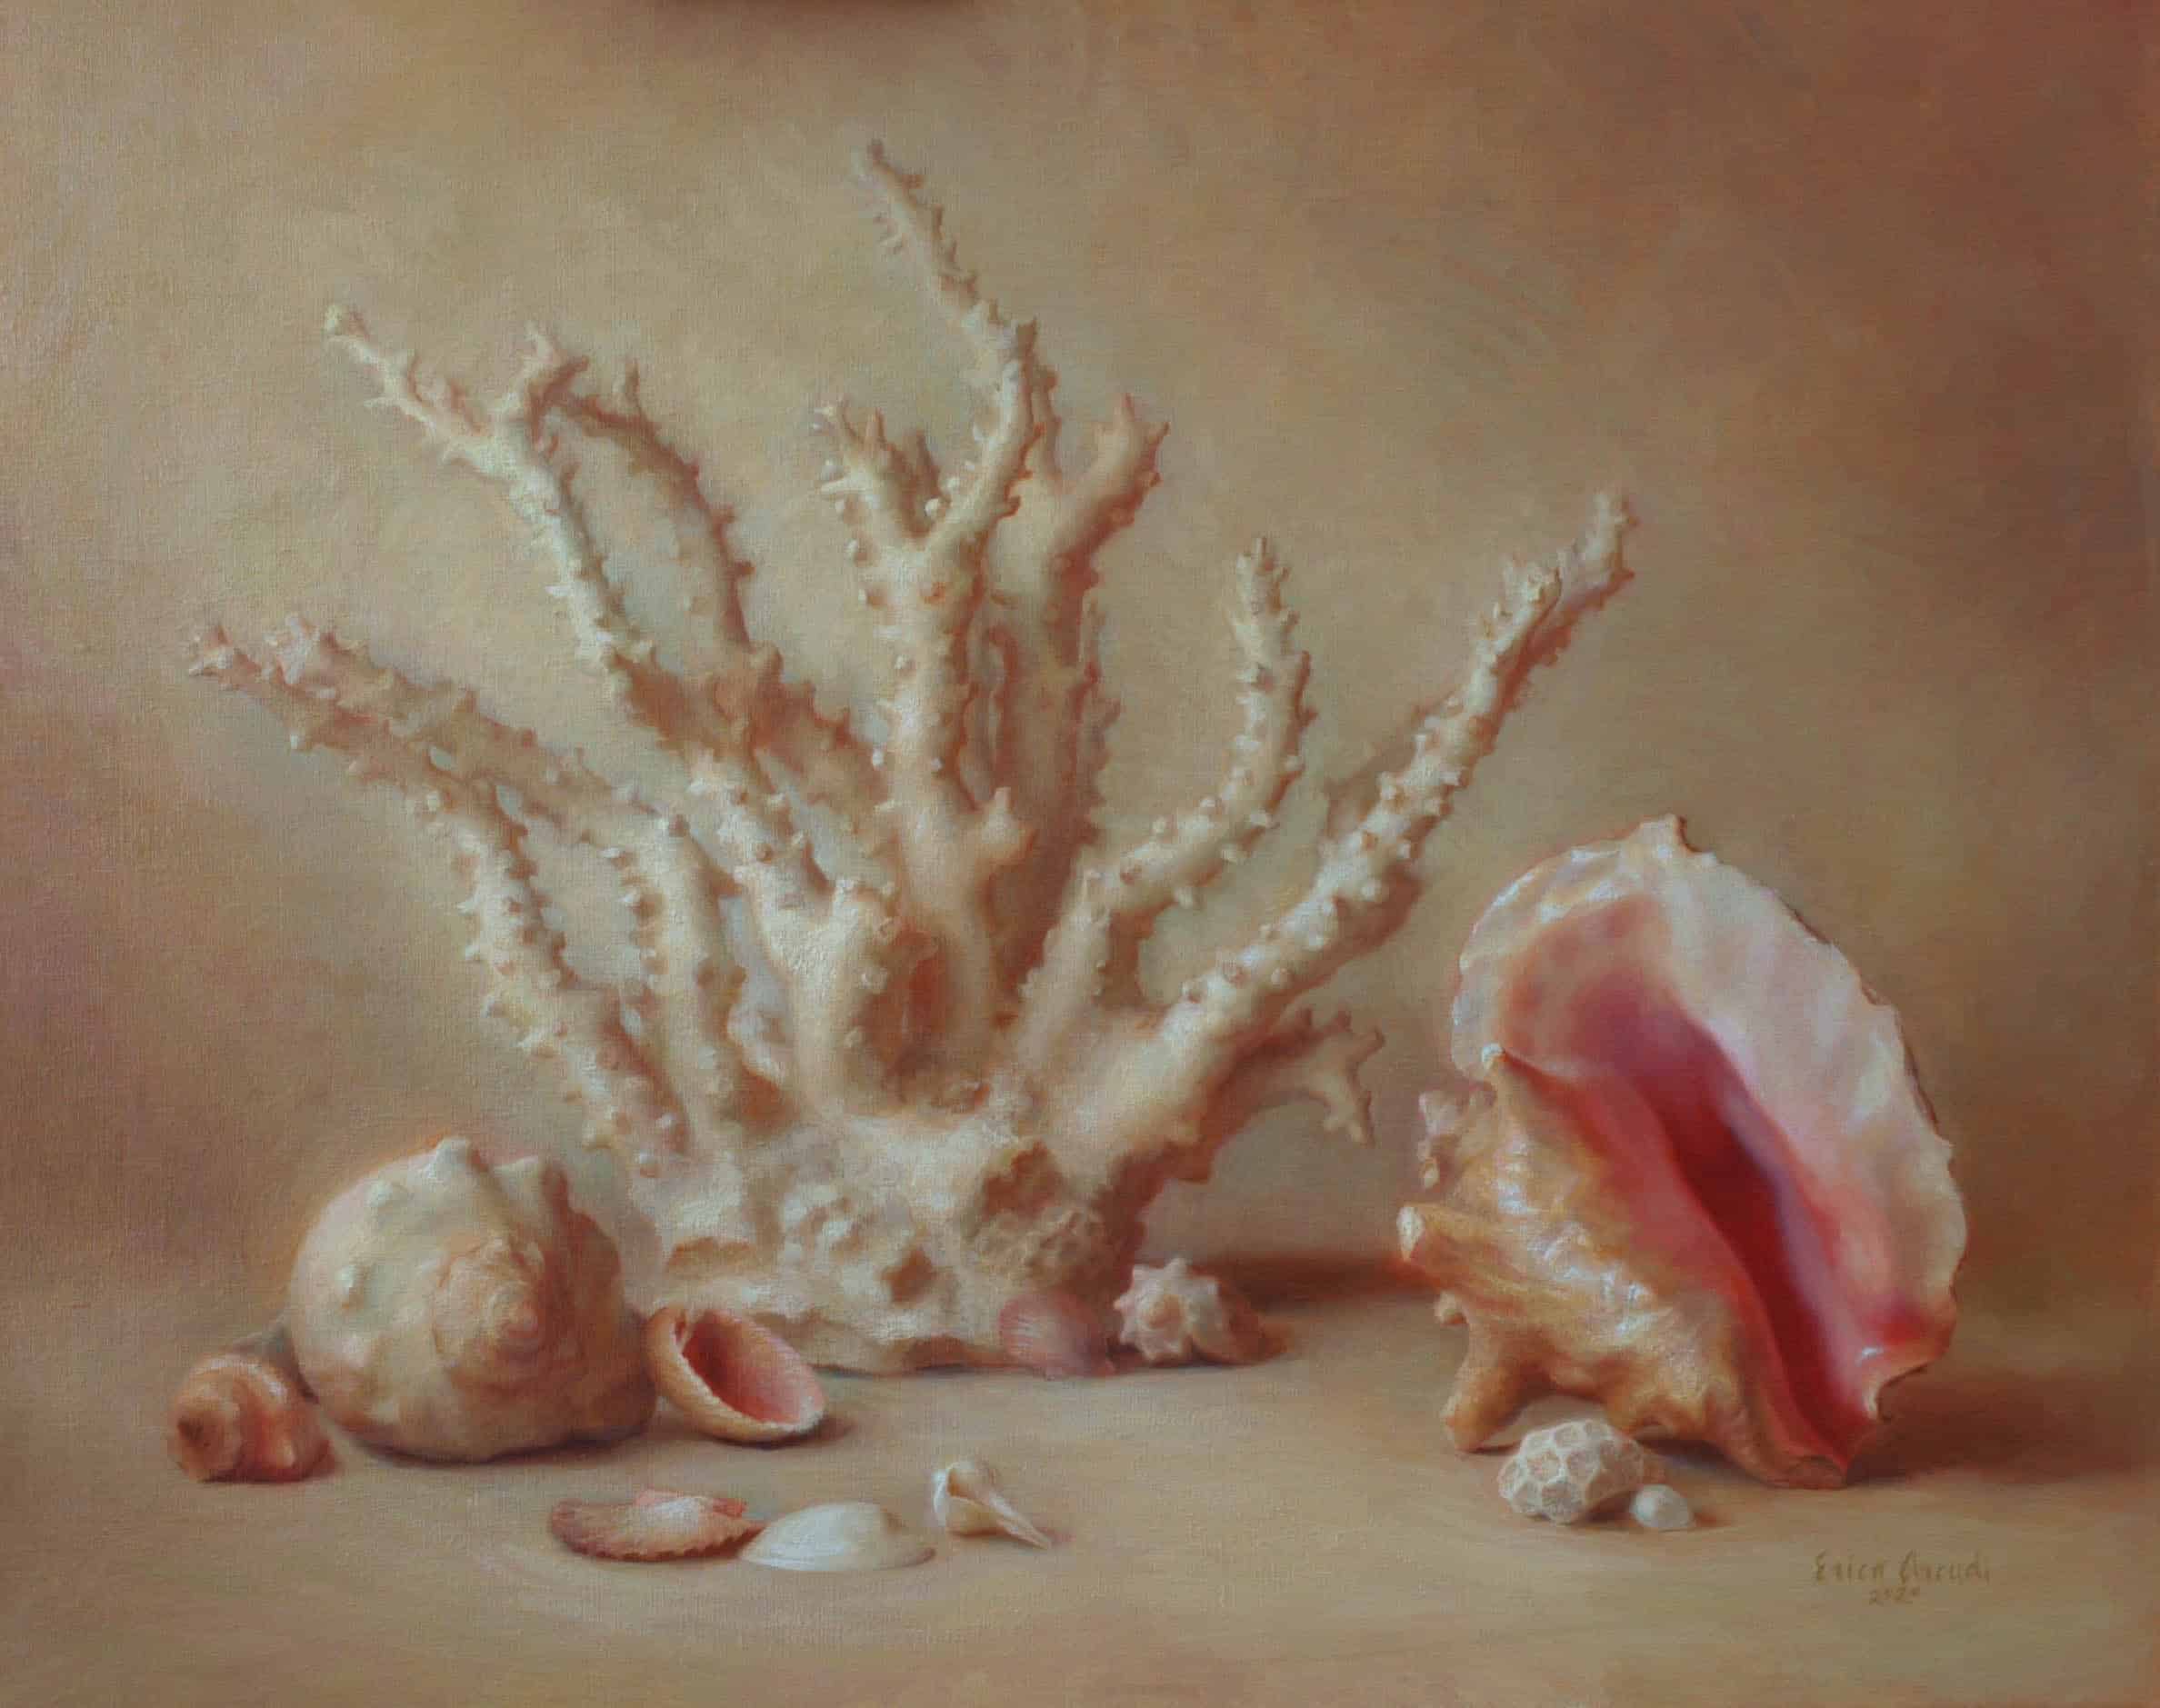 Erica Arcudi, "Collection", Oil on canvas, 24 x 30 in. 2020